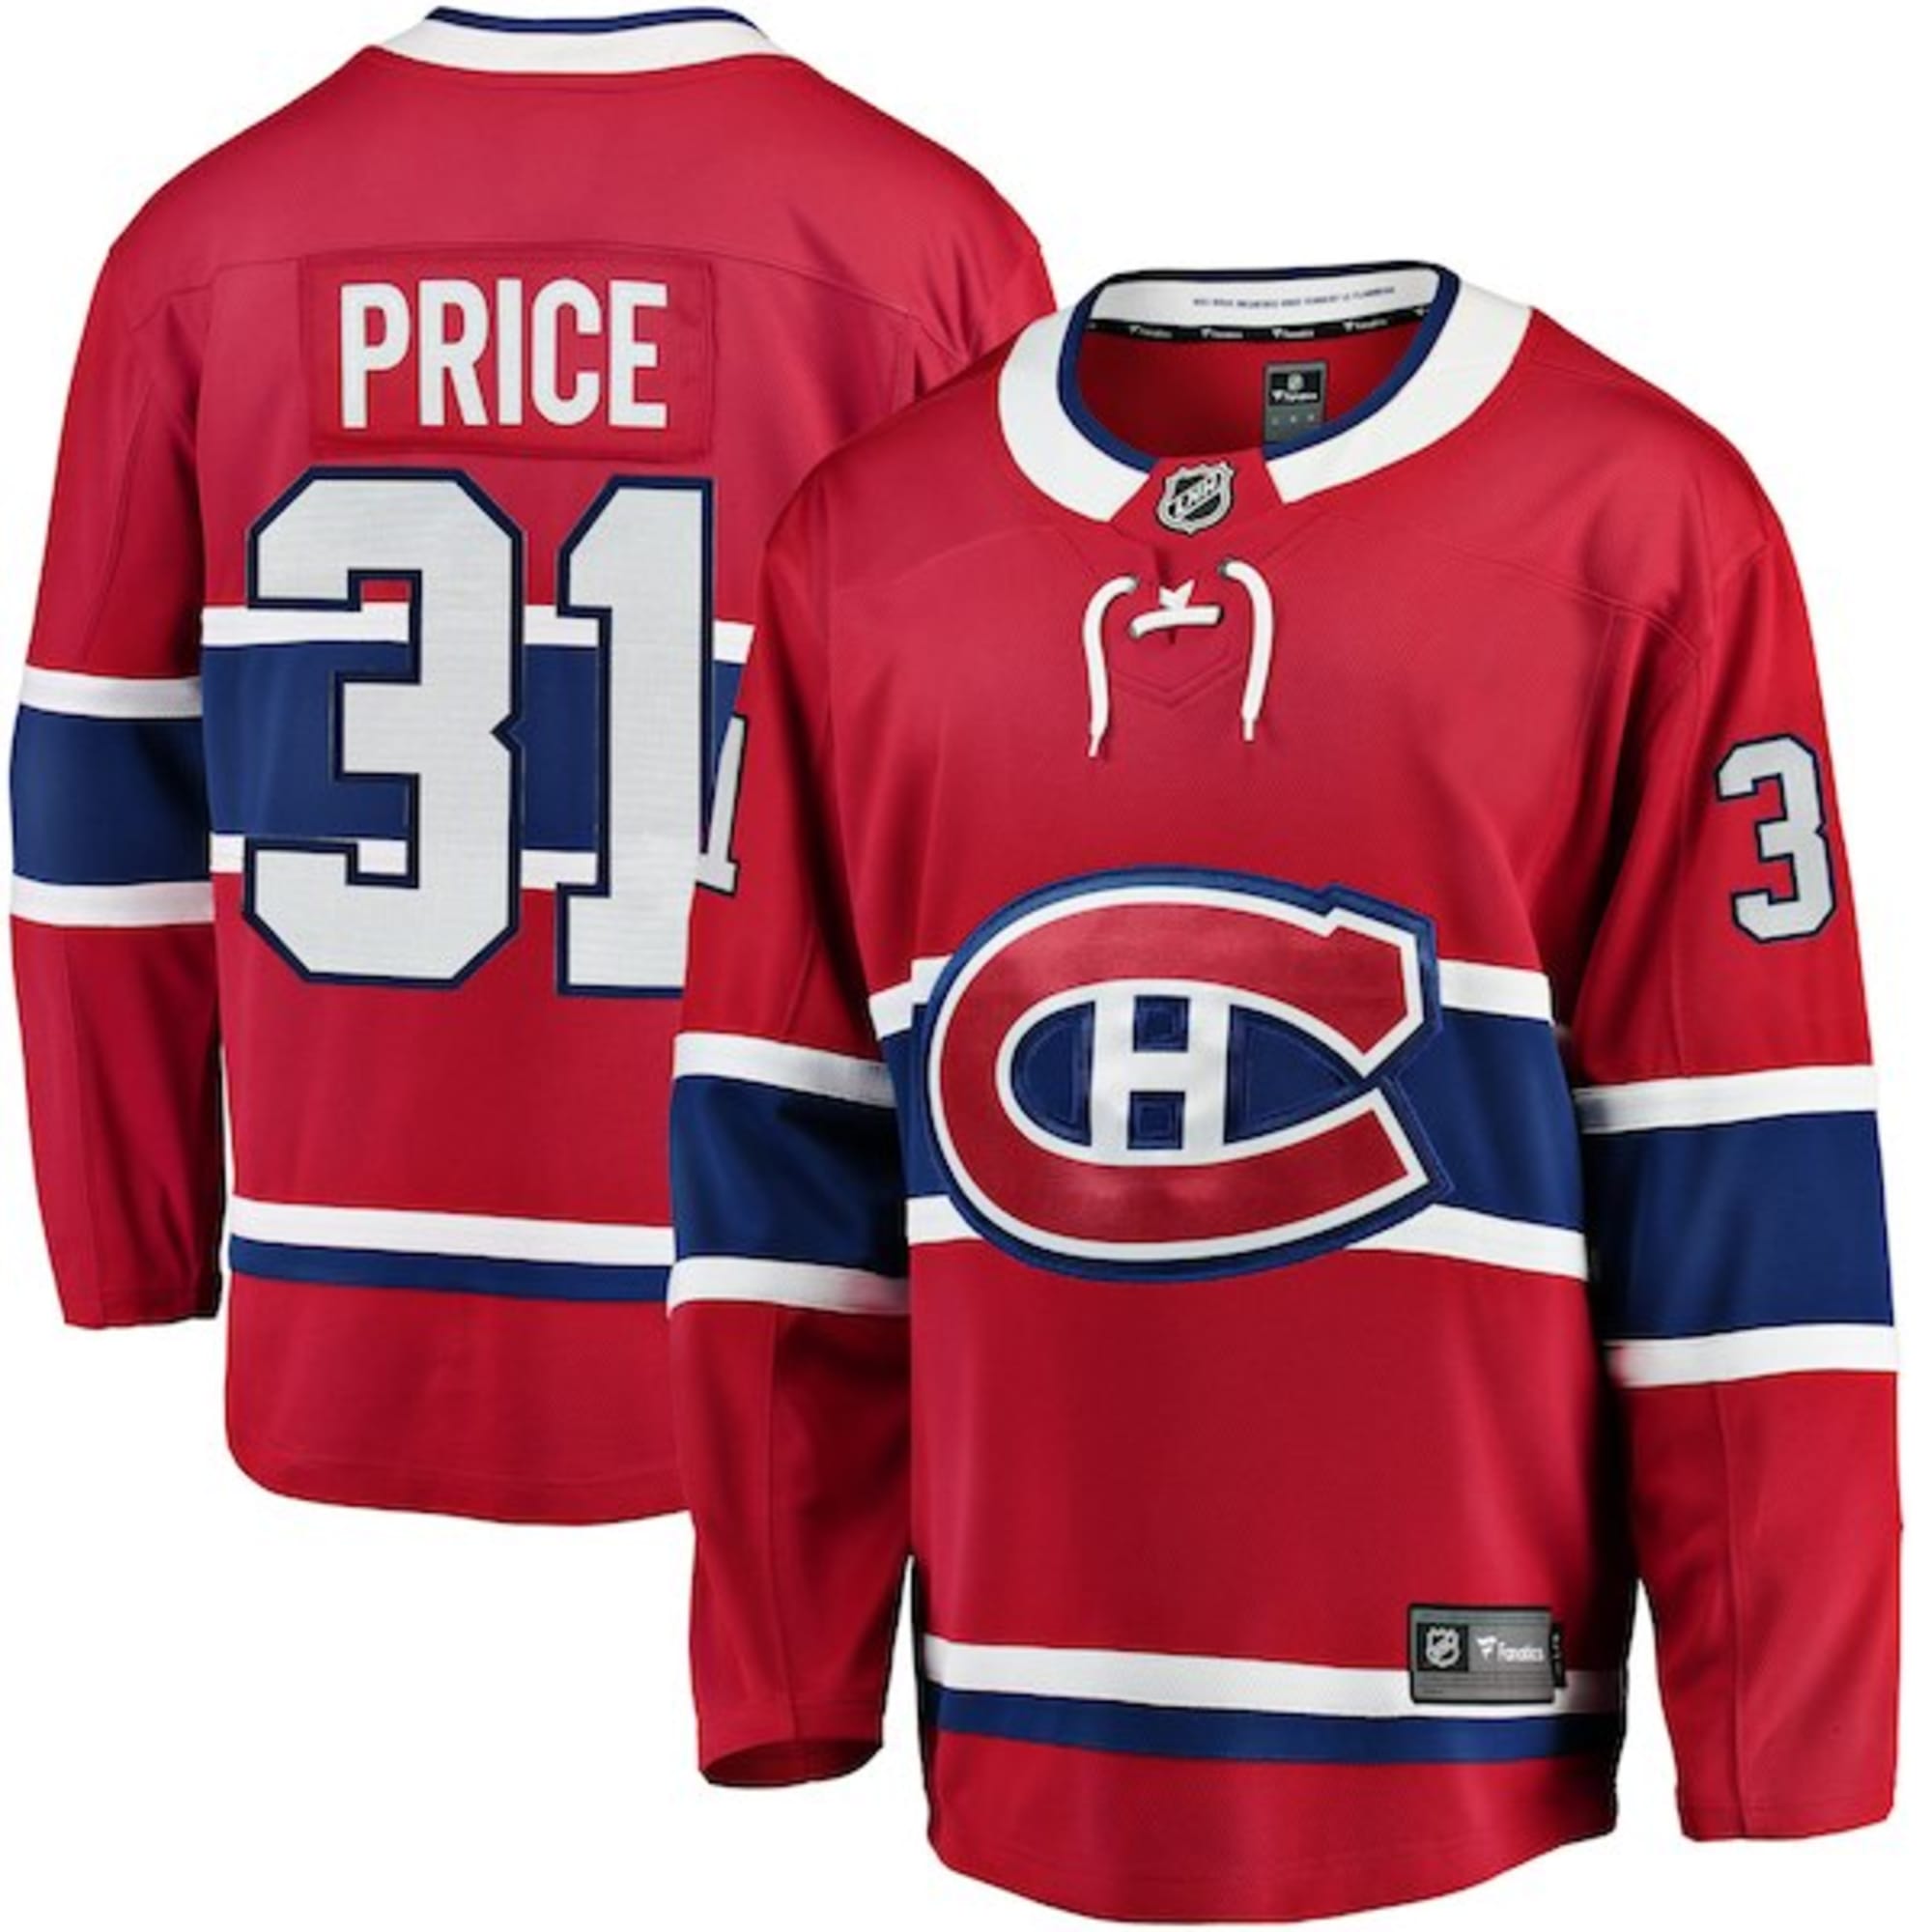 Montreal Canadiens Holiday Gift Guide